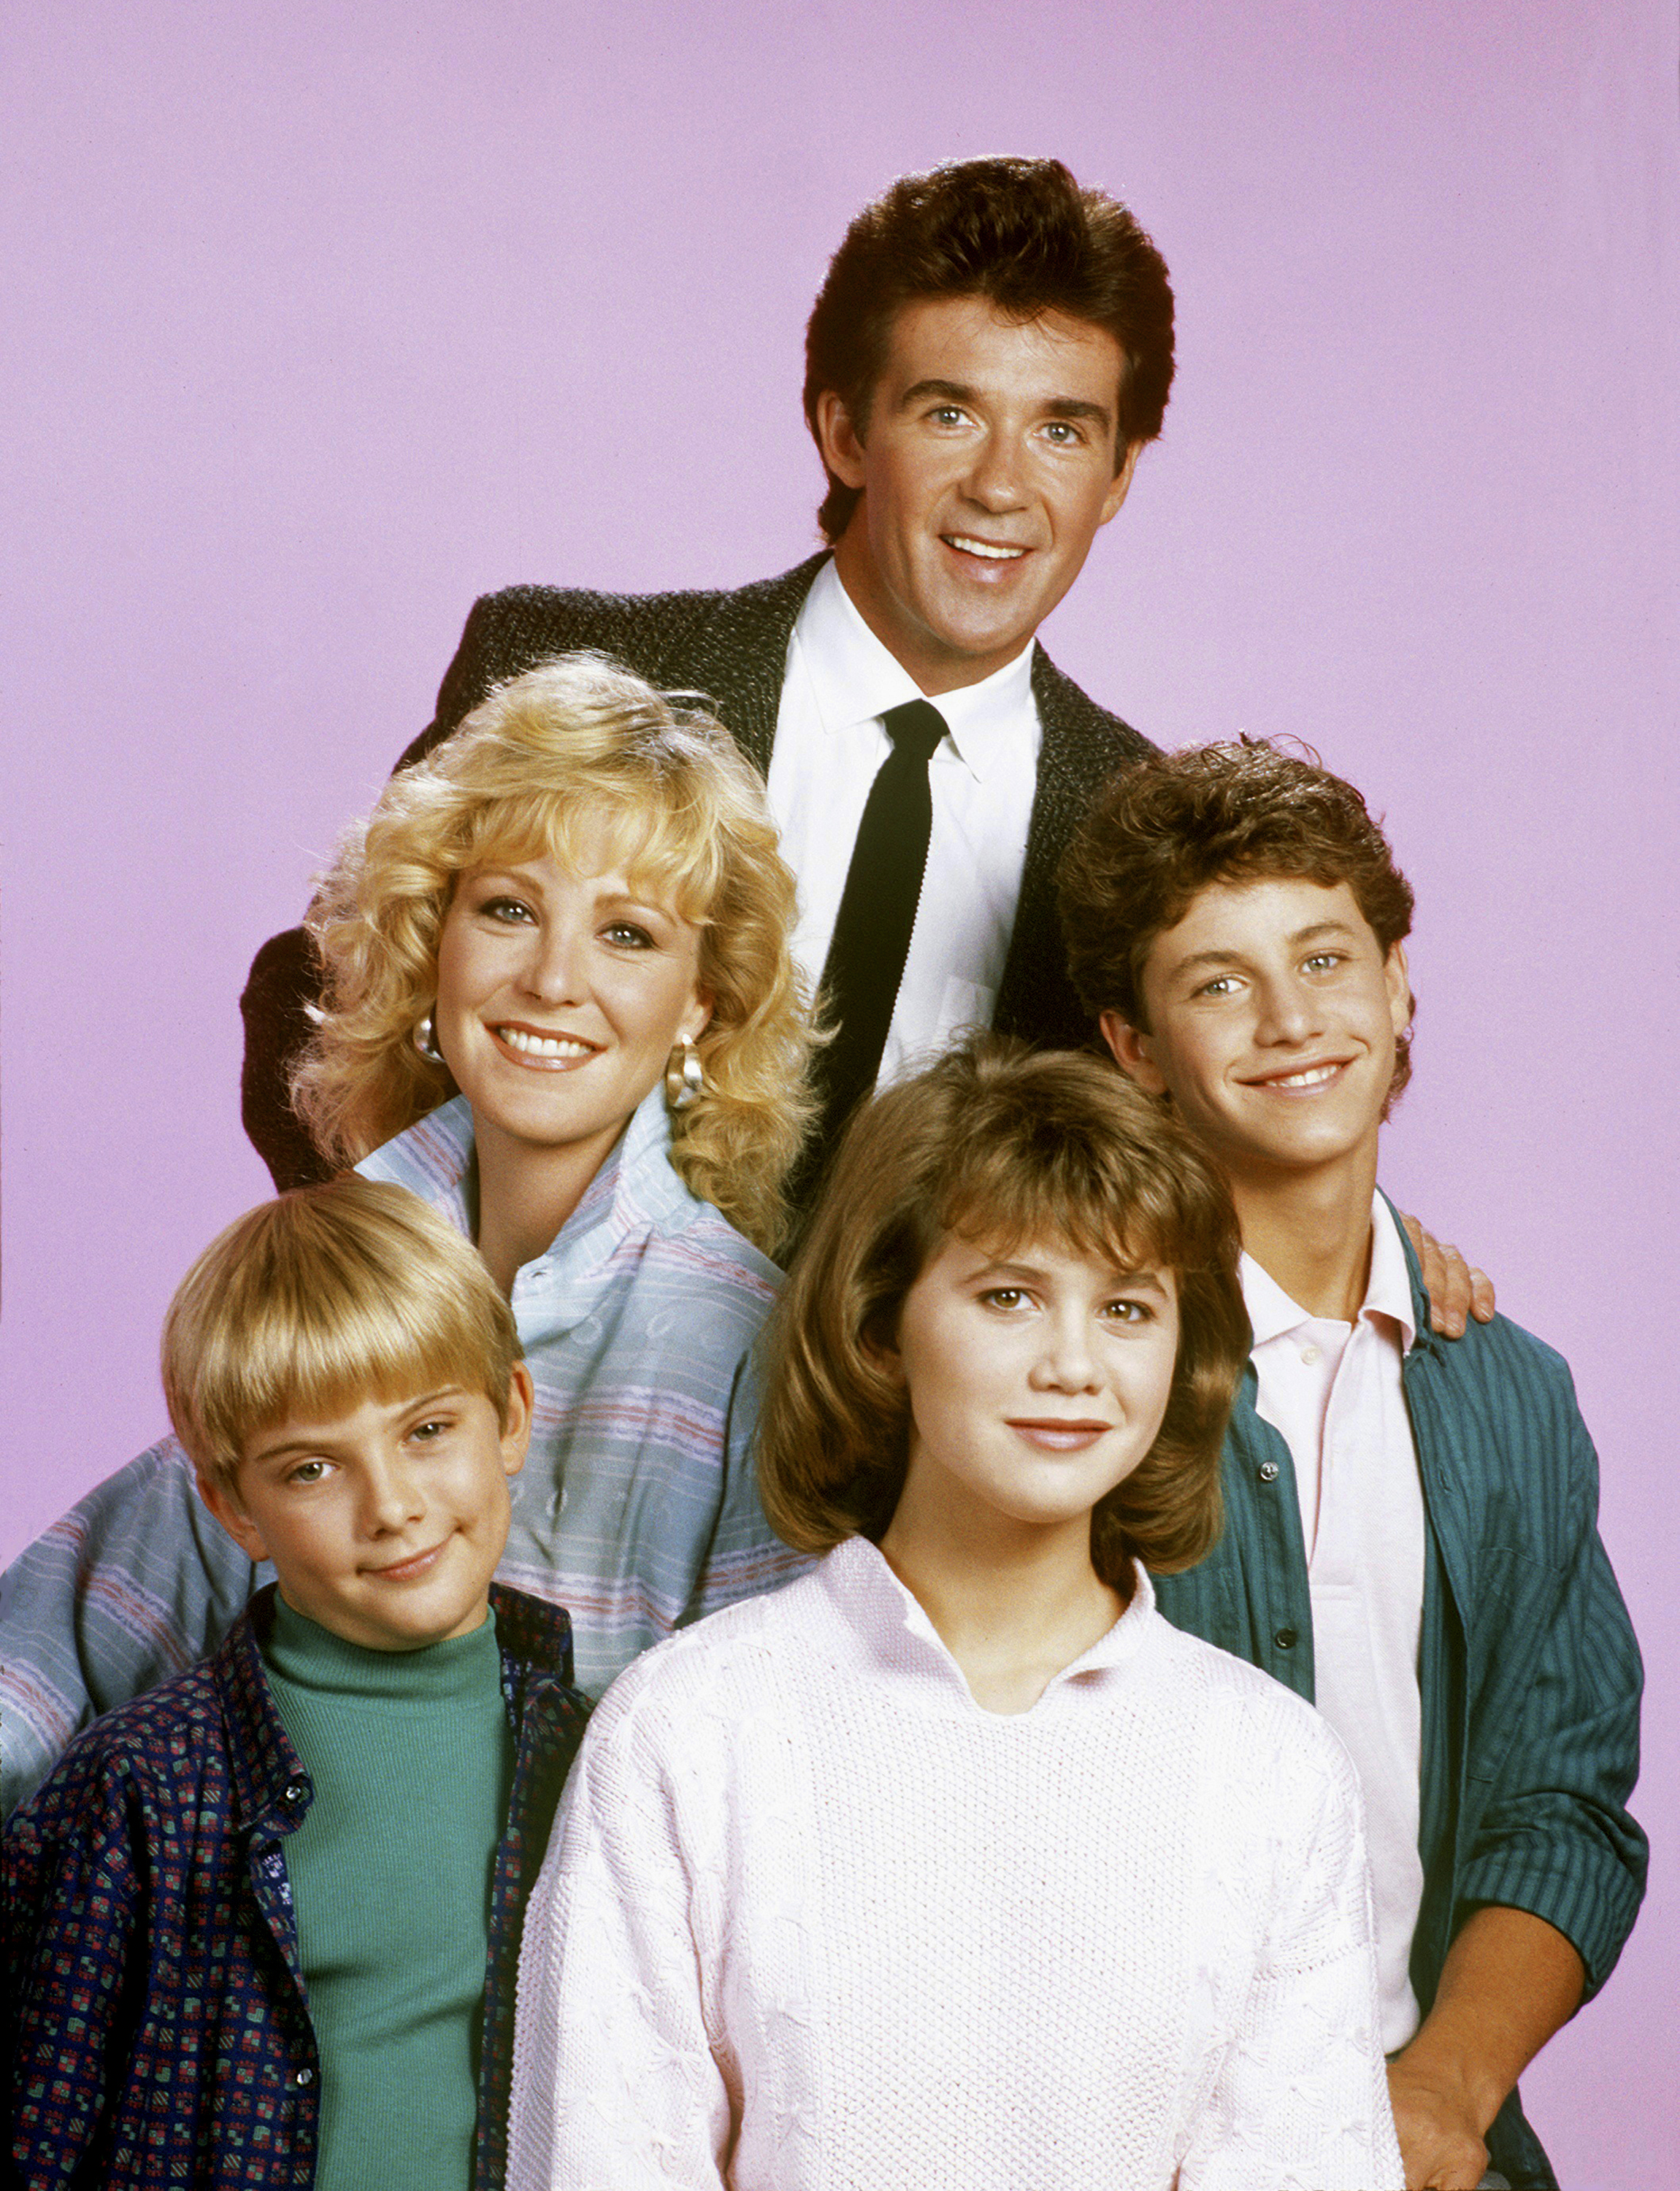 Pictured from back: Alan Thicke (as Jason); Joanna Kerns (as Maggie), Kirk Cameron (as Mike); Jeremy Miller (as Ben), Tracey Gold (as Carol) in the sitcom "Growing Pains" on September 30, 1986 | Source: Getty Images